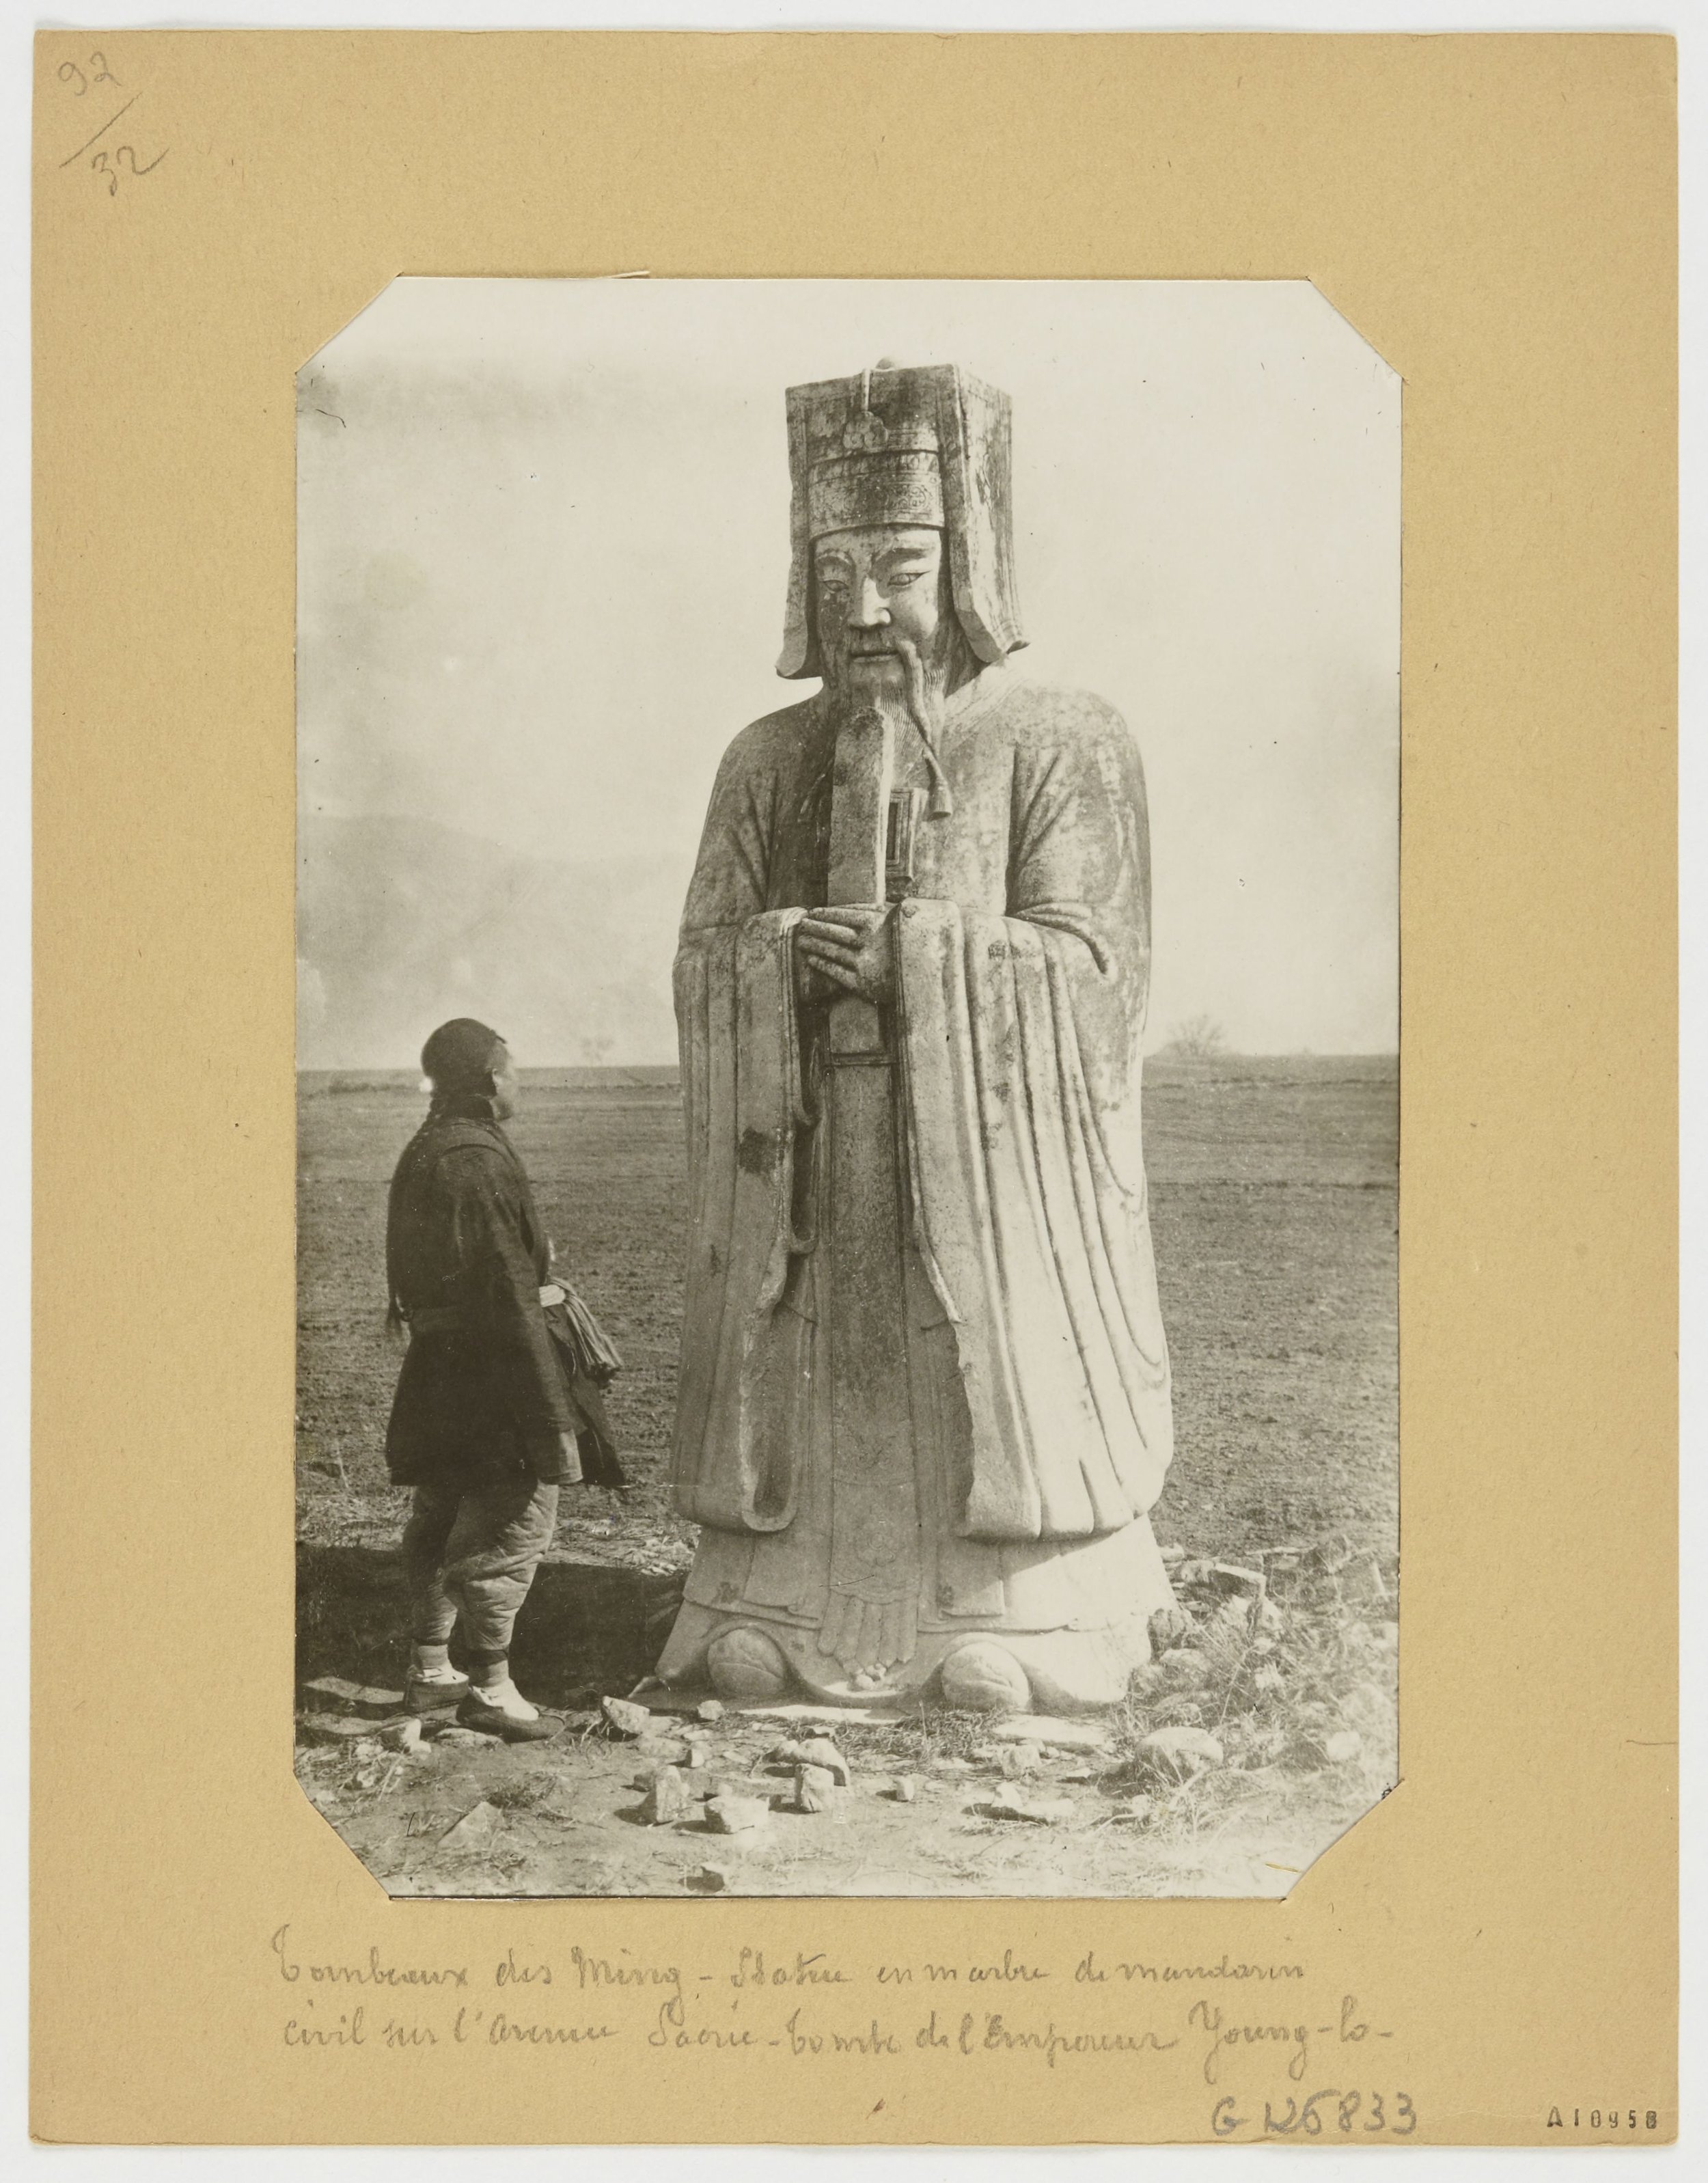 firmin laribe china 1904 1910 photography of china 7 - Firmin Laribe | Archive | Portrait | Black and white photography | Costumes | Architectural photography - Firmin Laribe